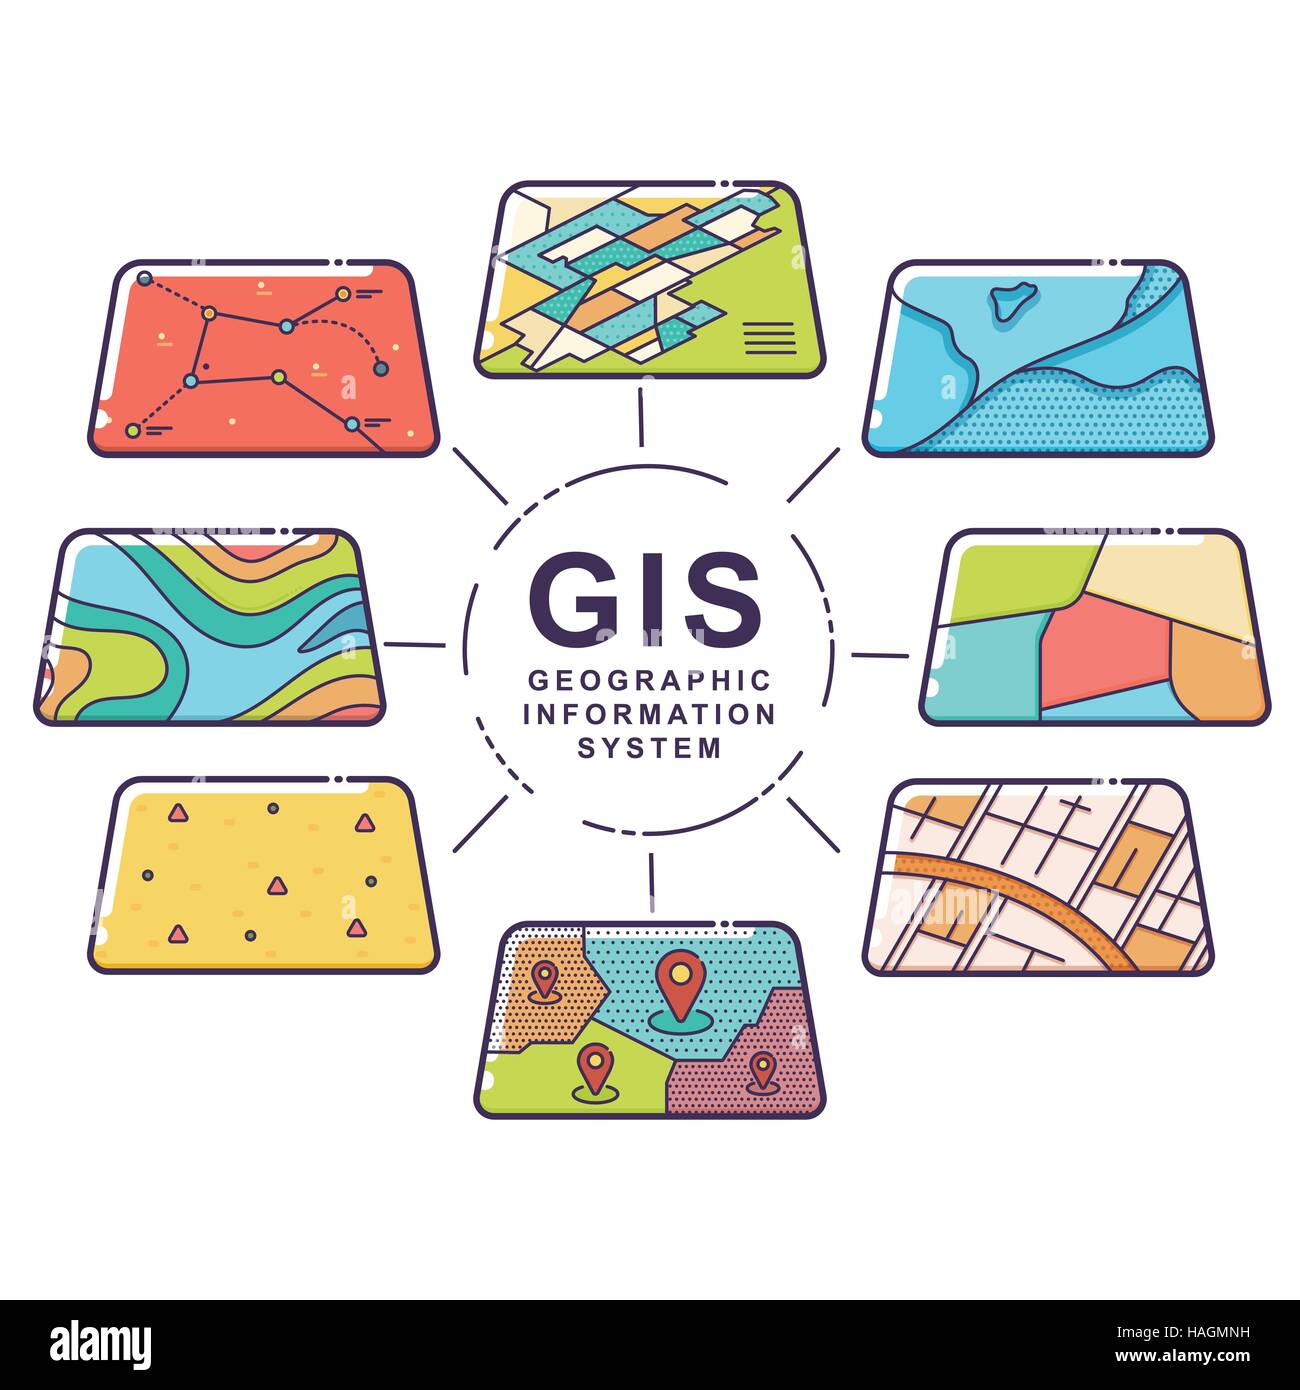 Vector Illustration of GIS Spatial Data Layers Concept for Business Analysis, Geographic Information System, Icons Design, Line Stock Vector